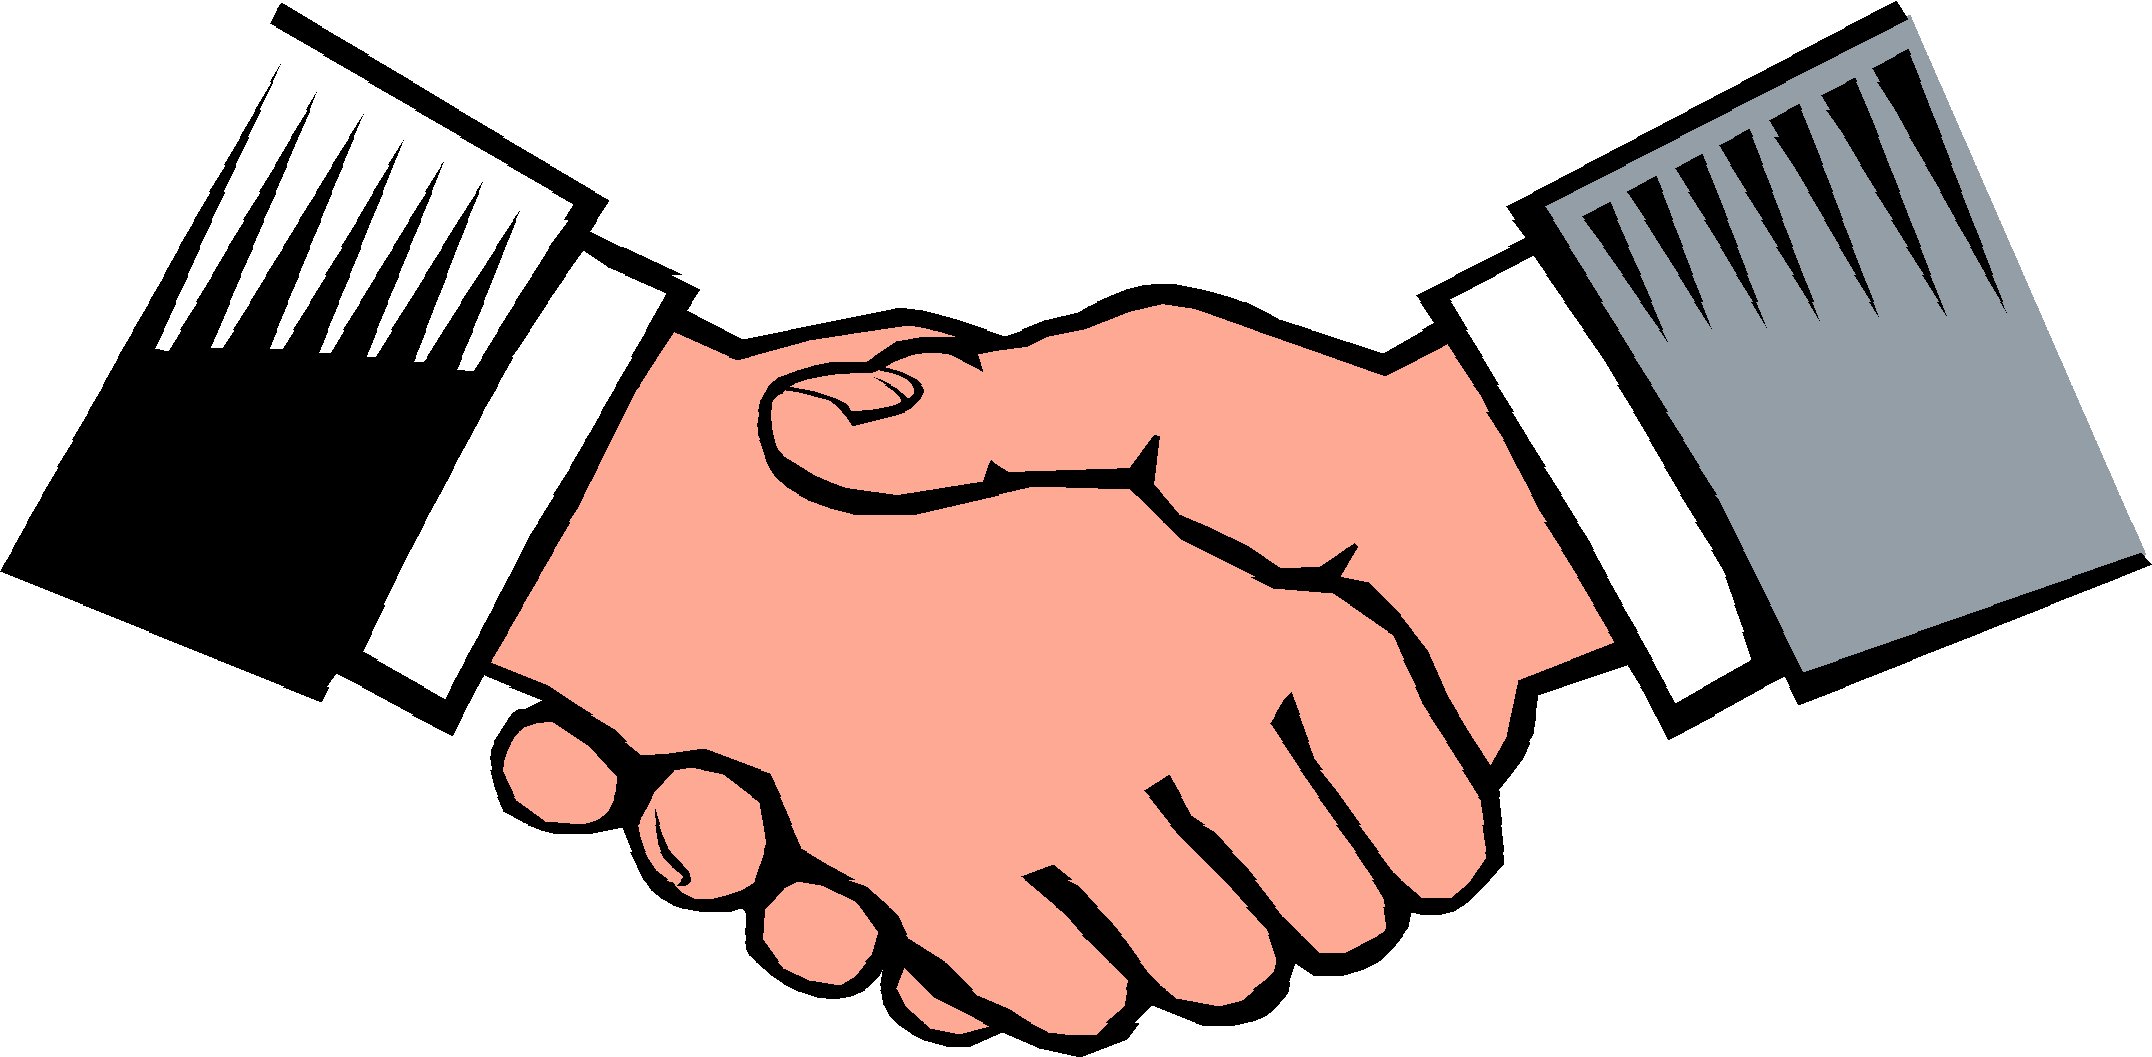 Images Shaking Hands - Clipart library